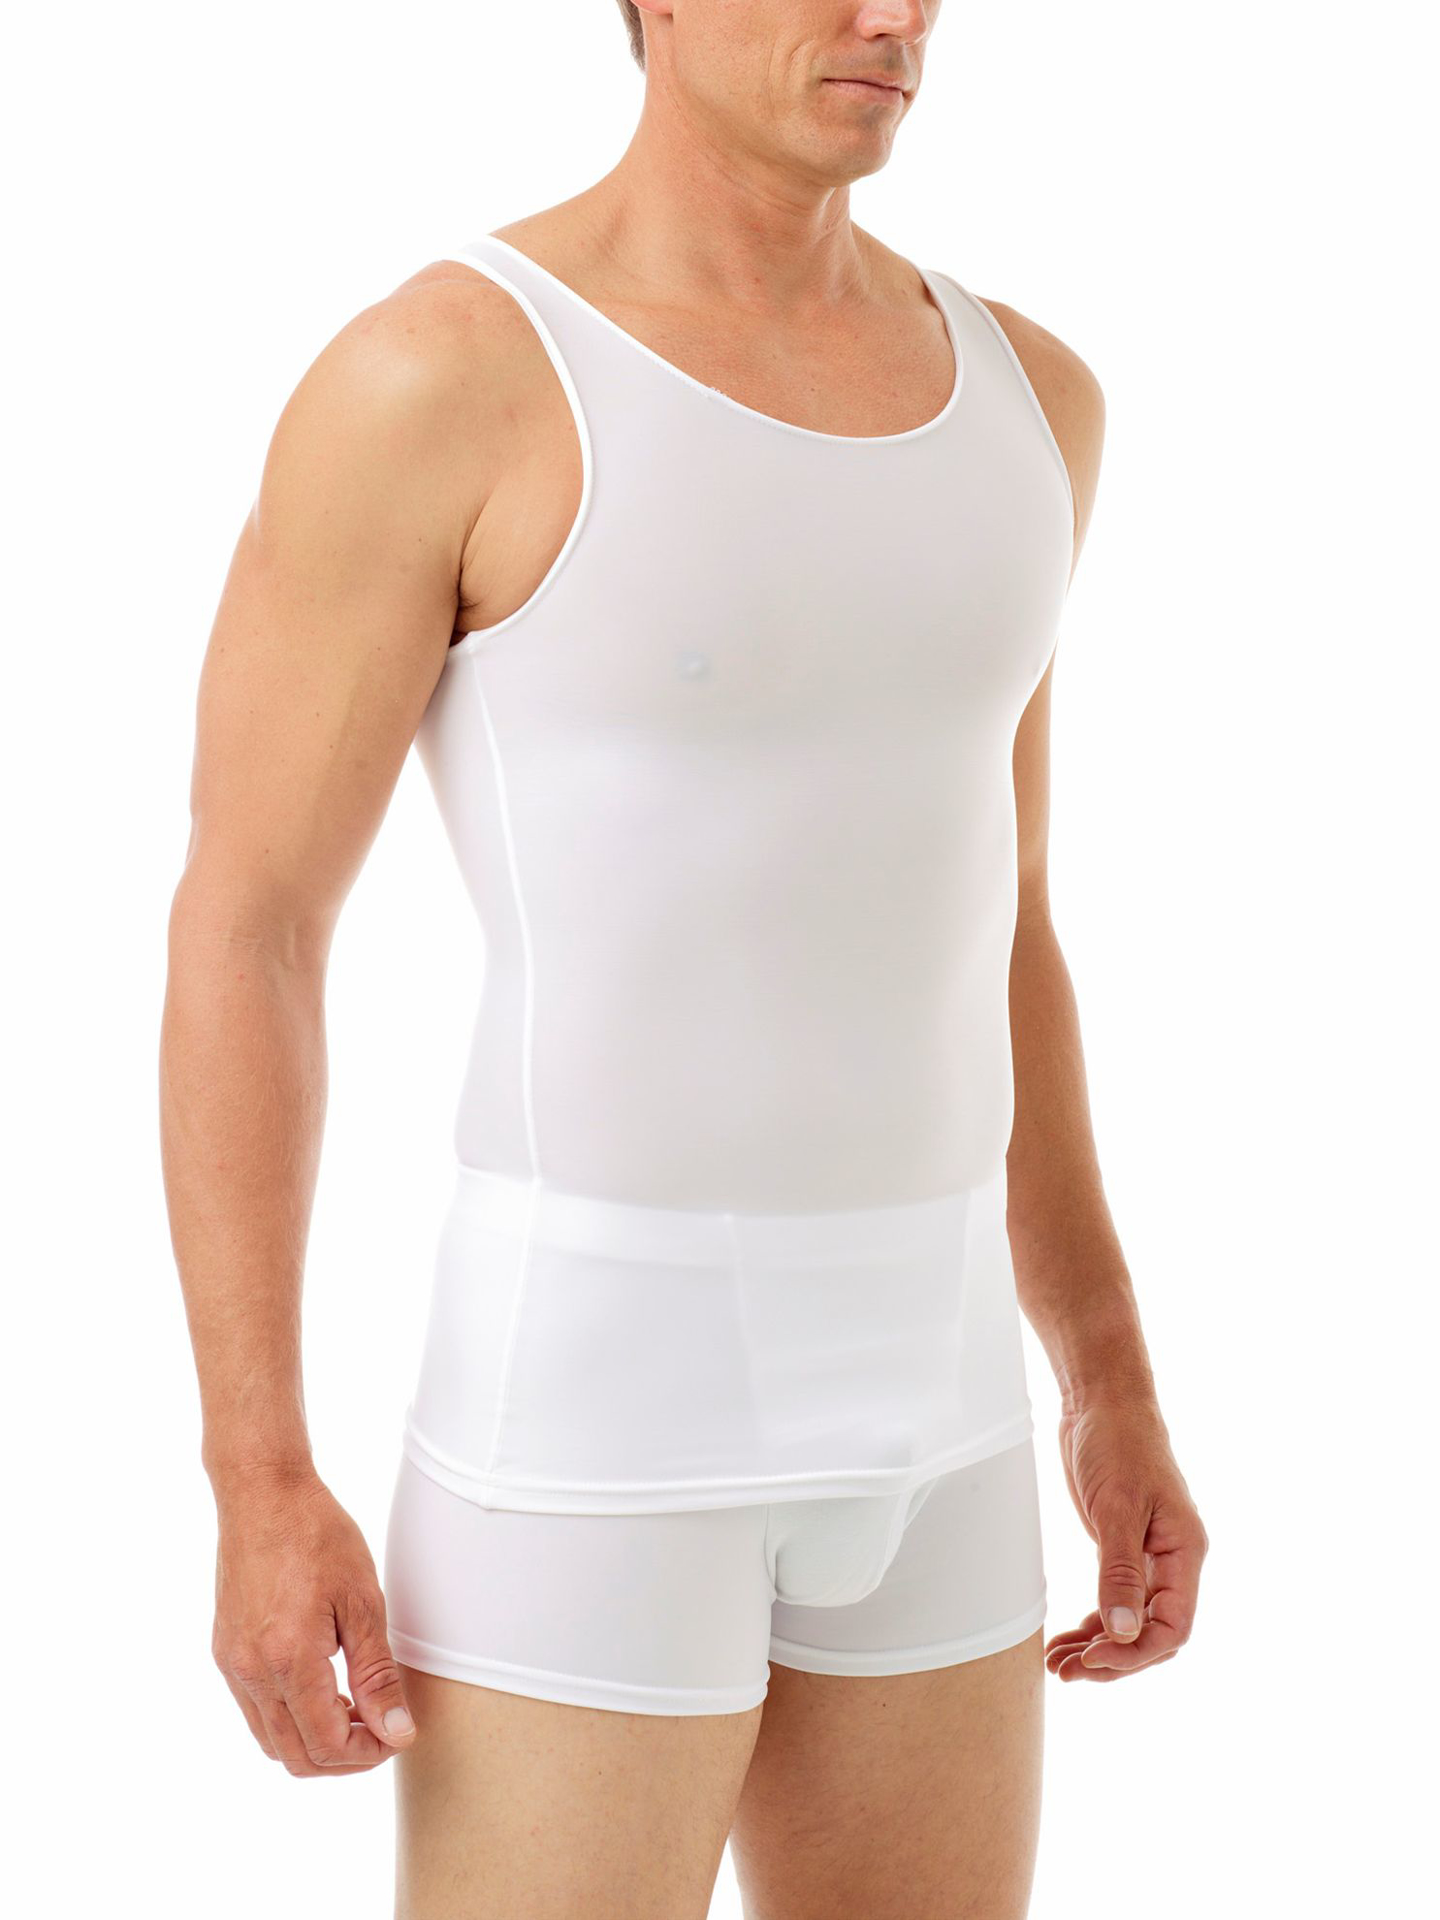 UK Slimming Compression Undershirt for Men Pull Me In Hold In Male Girdle Corset 